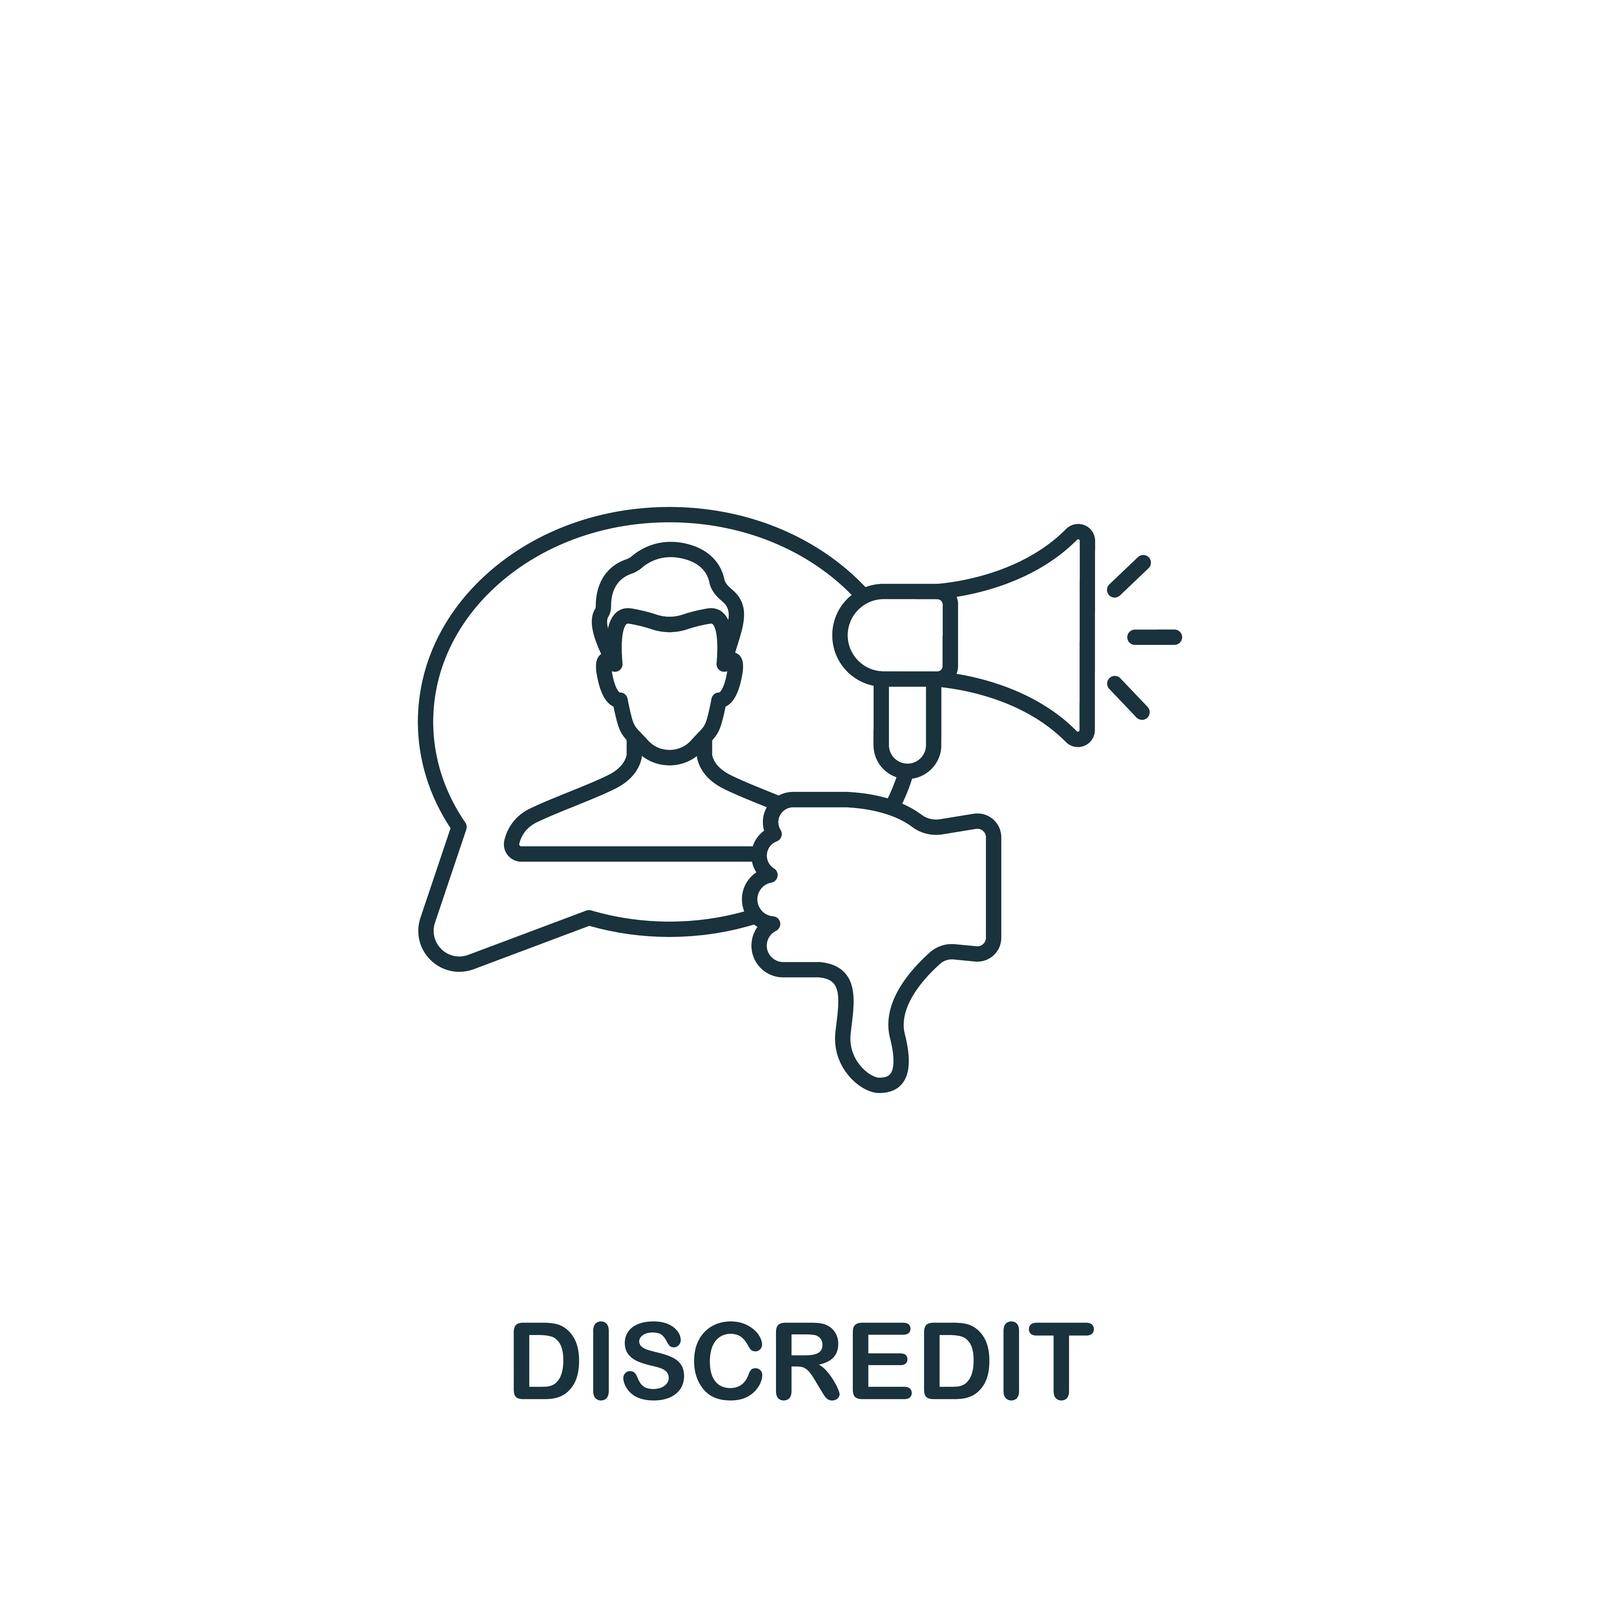 Discredit icon line. Simple element harassment symbol for templates, web design and infographics.